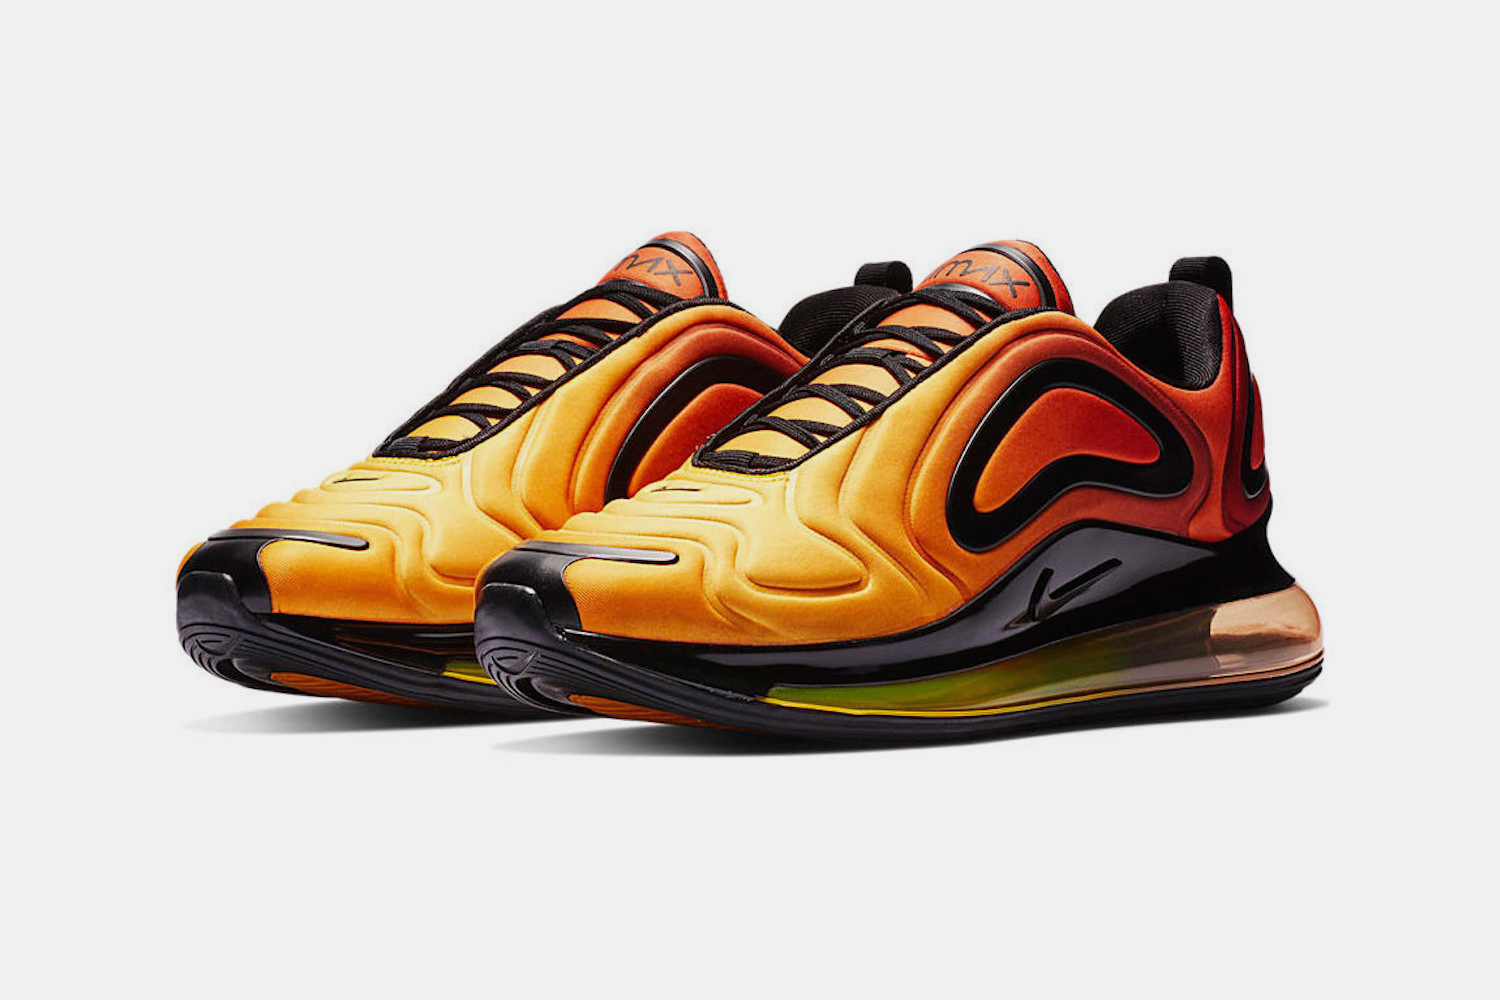 when did nike air max 720 come out